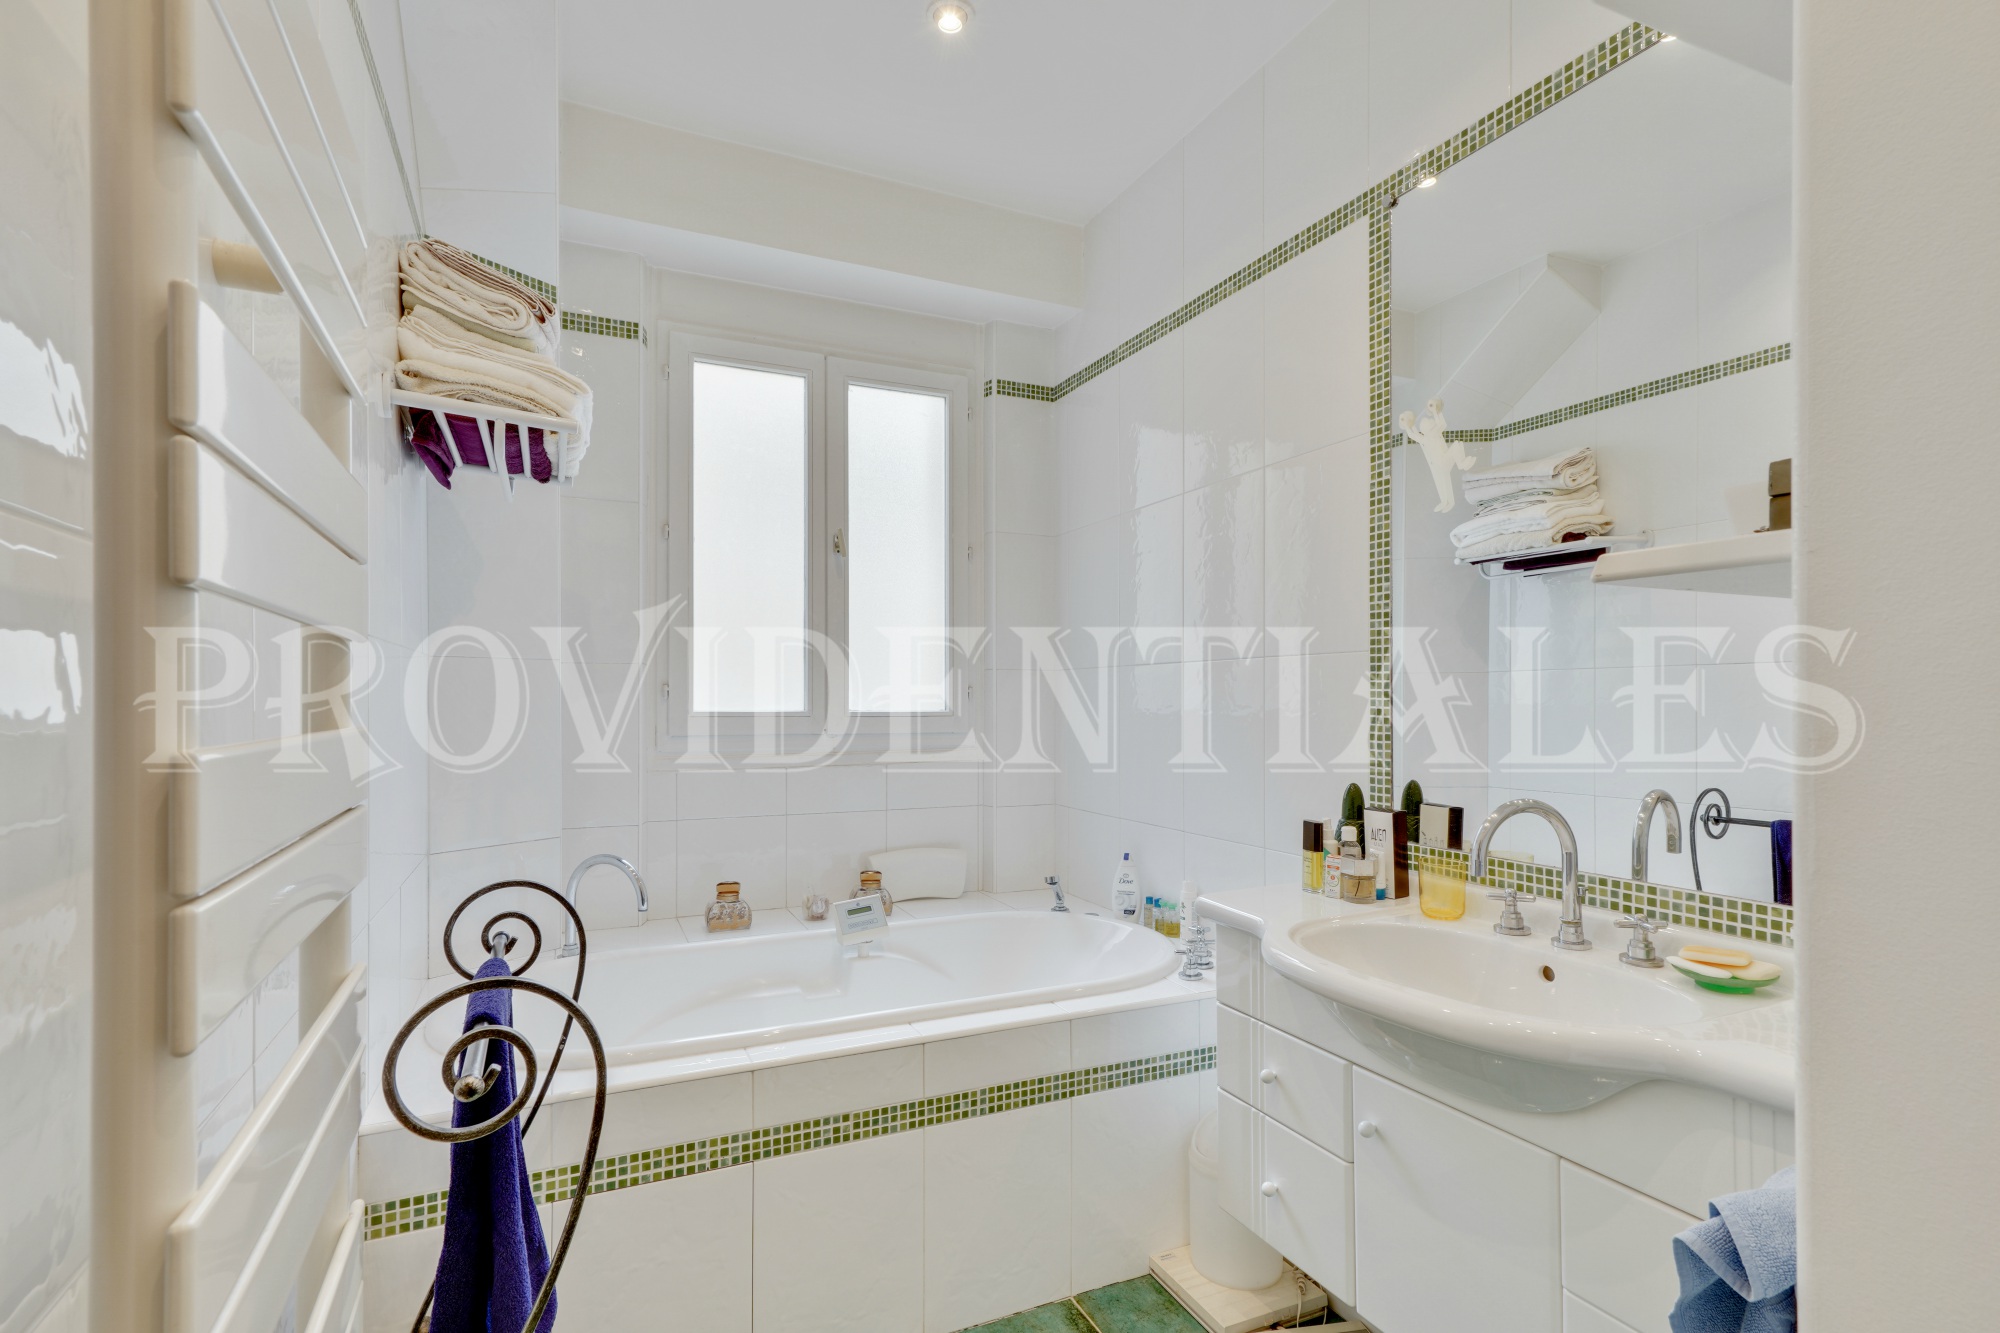 Providentiales Immobilier